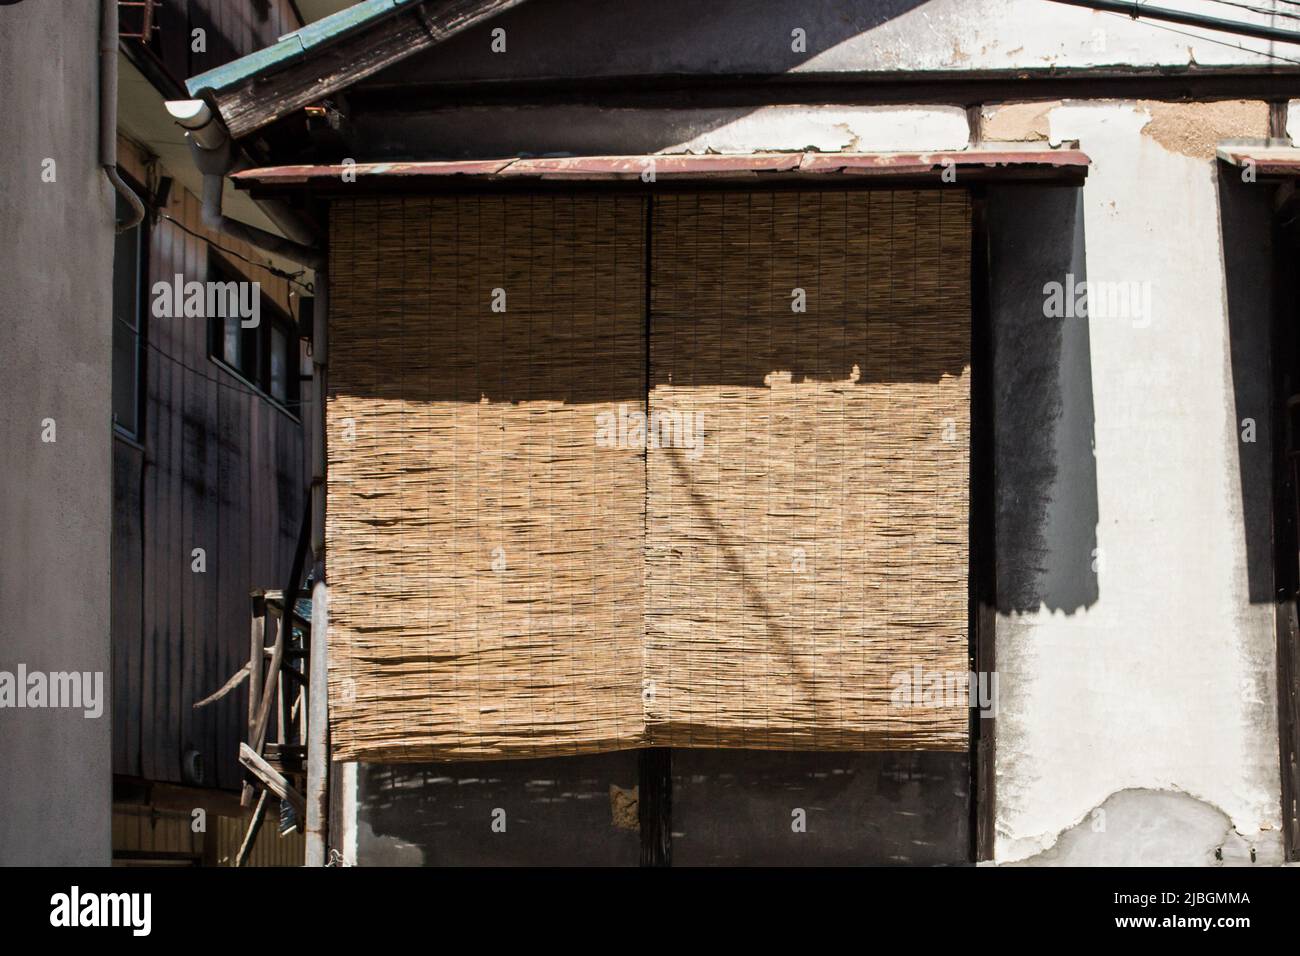 Old house with Japanese traditional blind Sudare, hanging on window to block sunlight. Sudare blind is made by knitting strips of bamboo string. Stock Photo